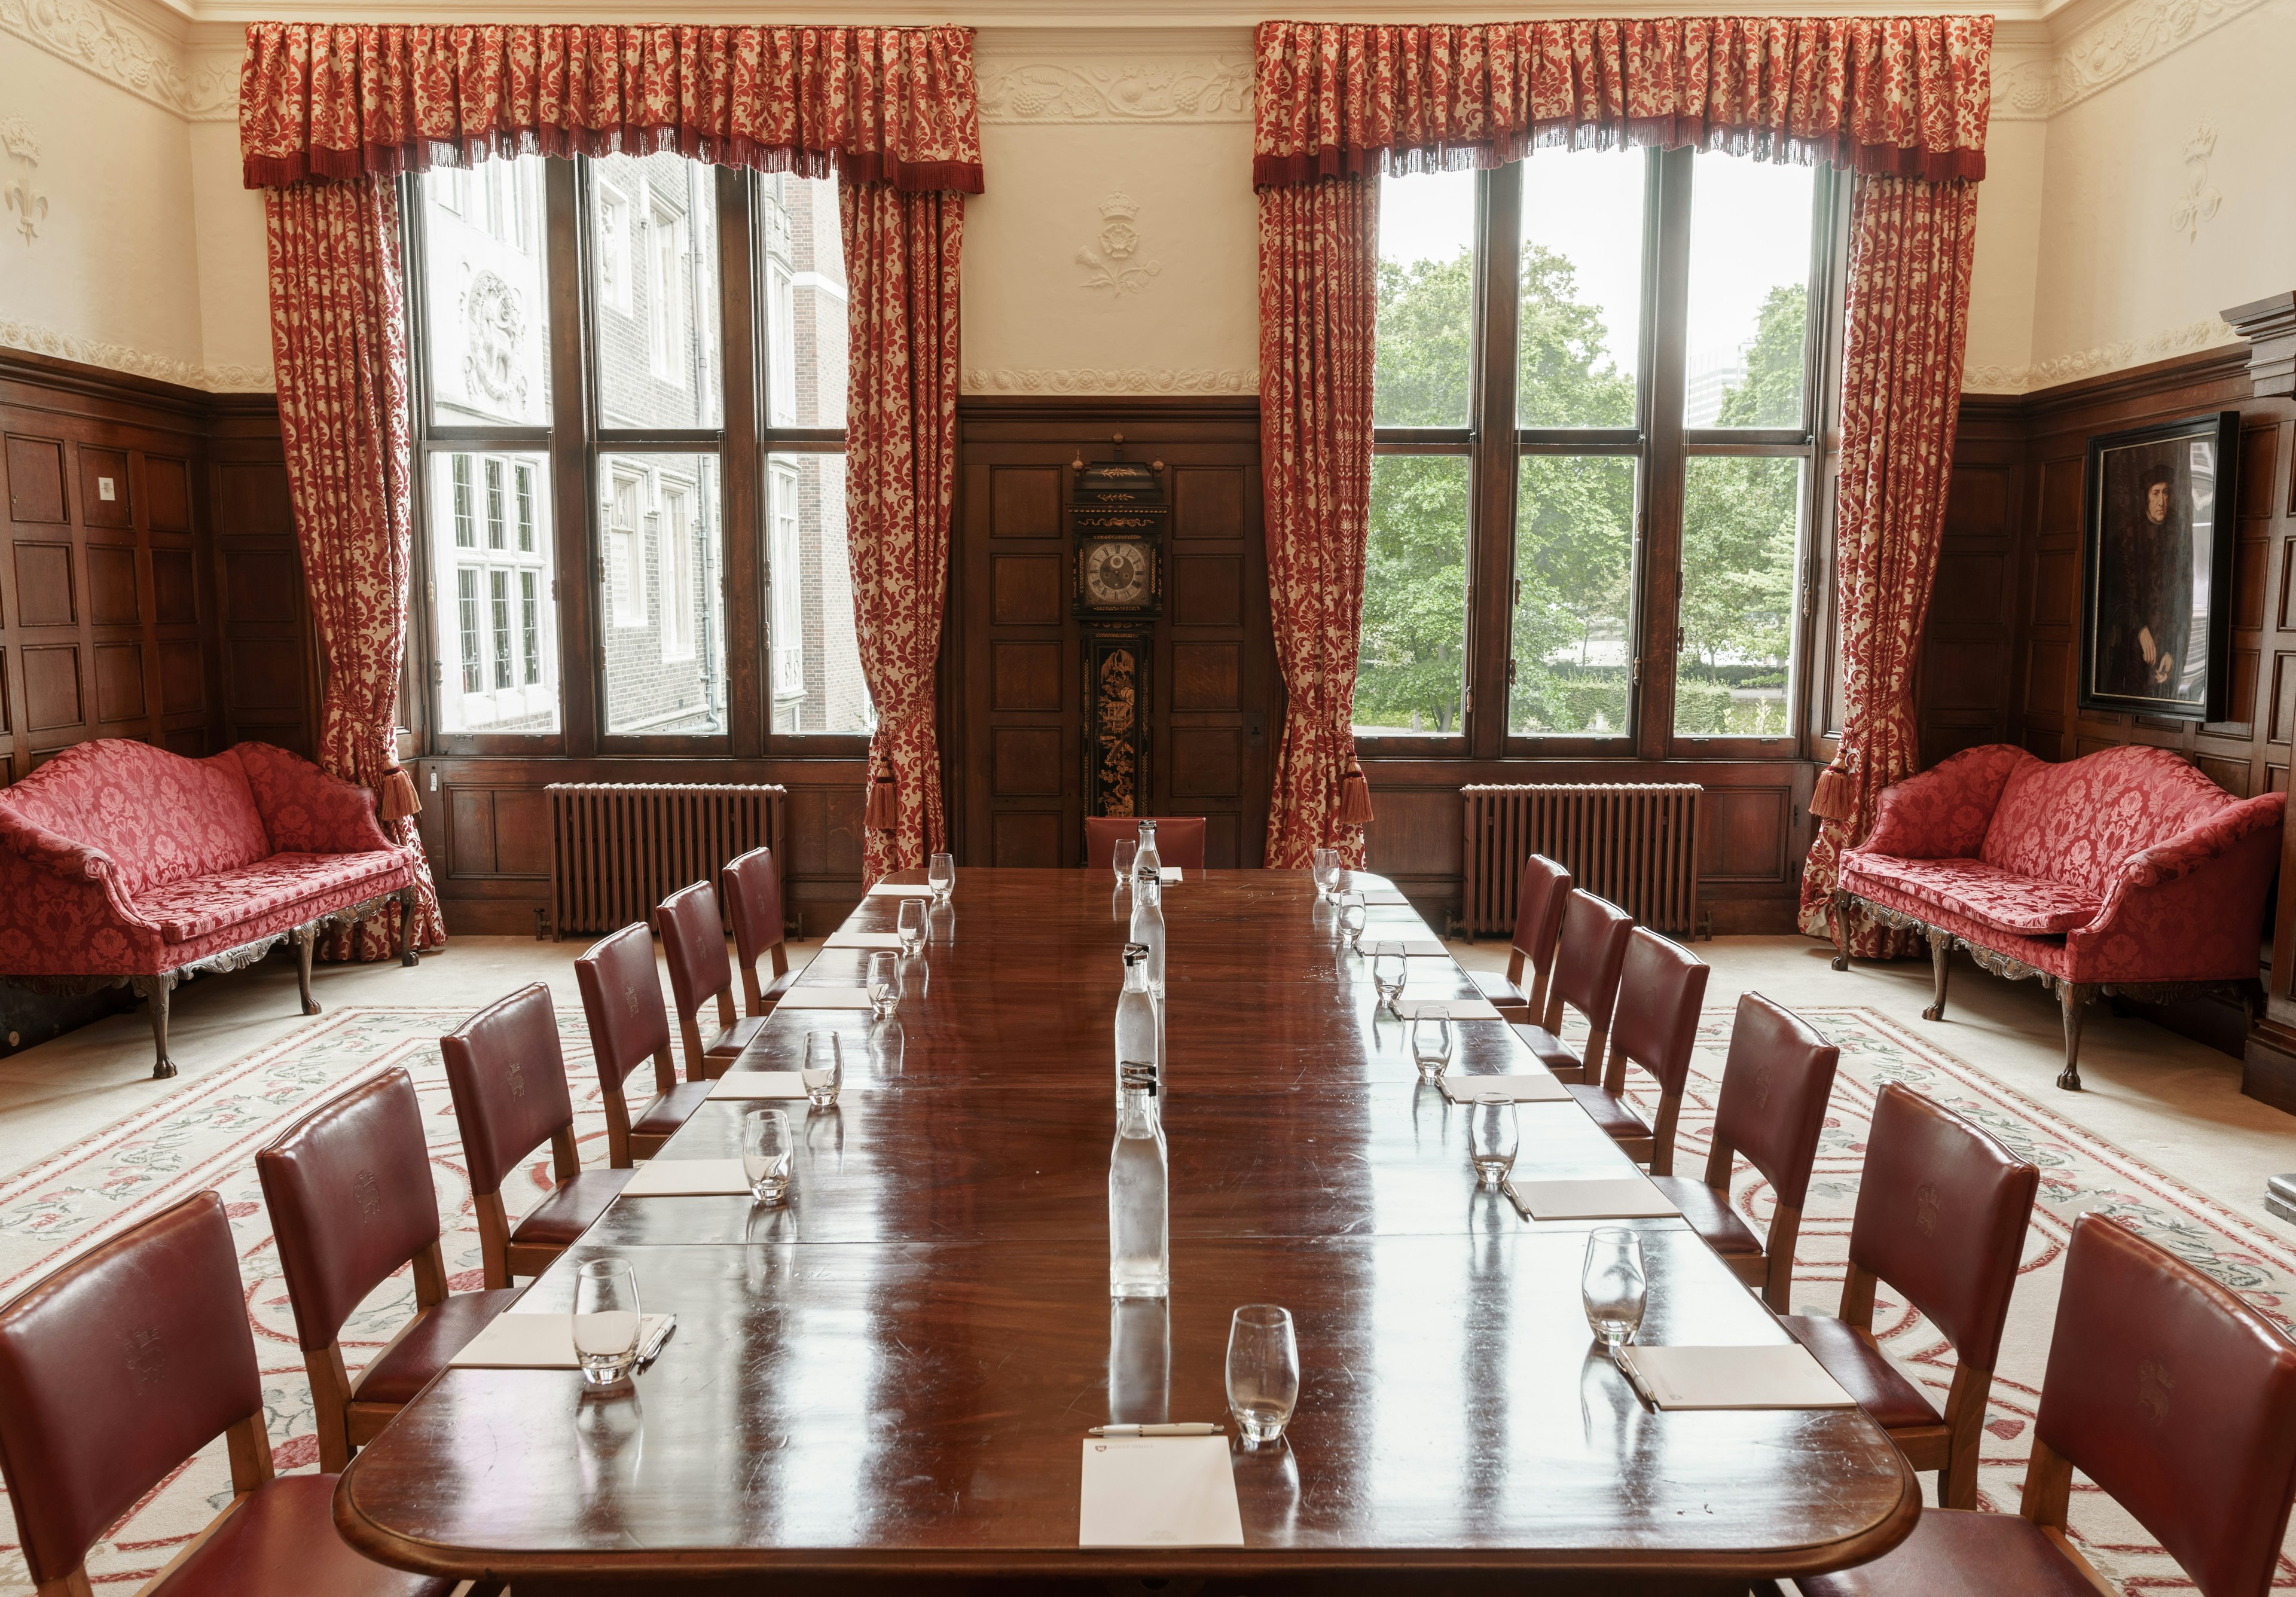 Business - The Honourable Society of the Middle Temple